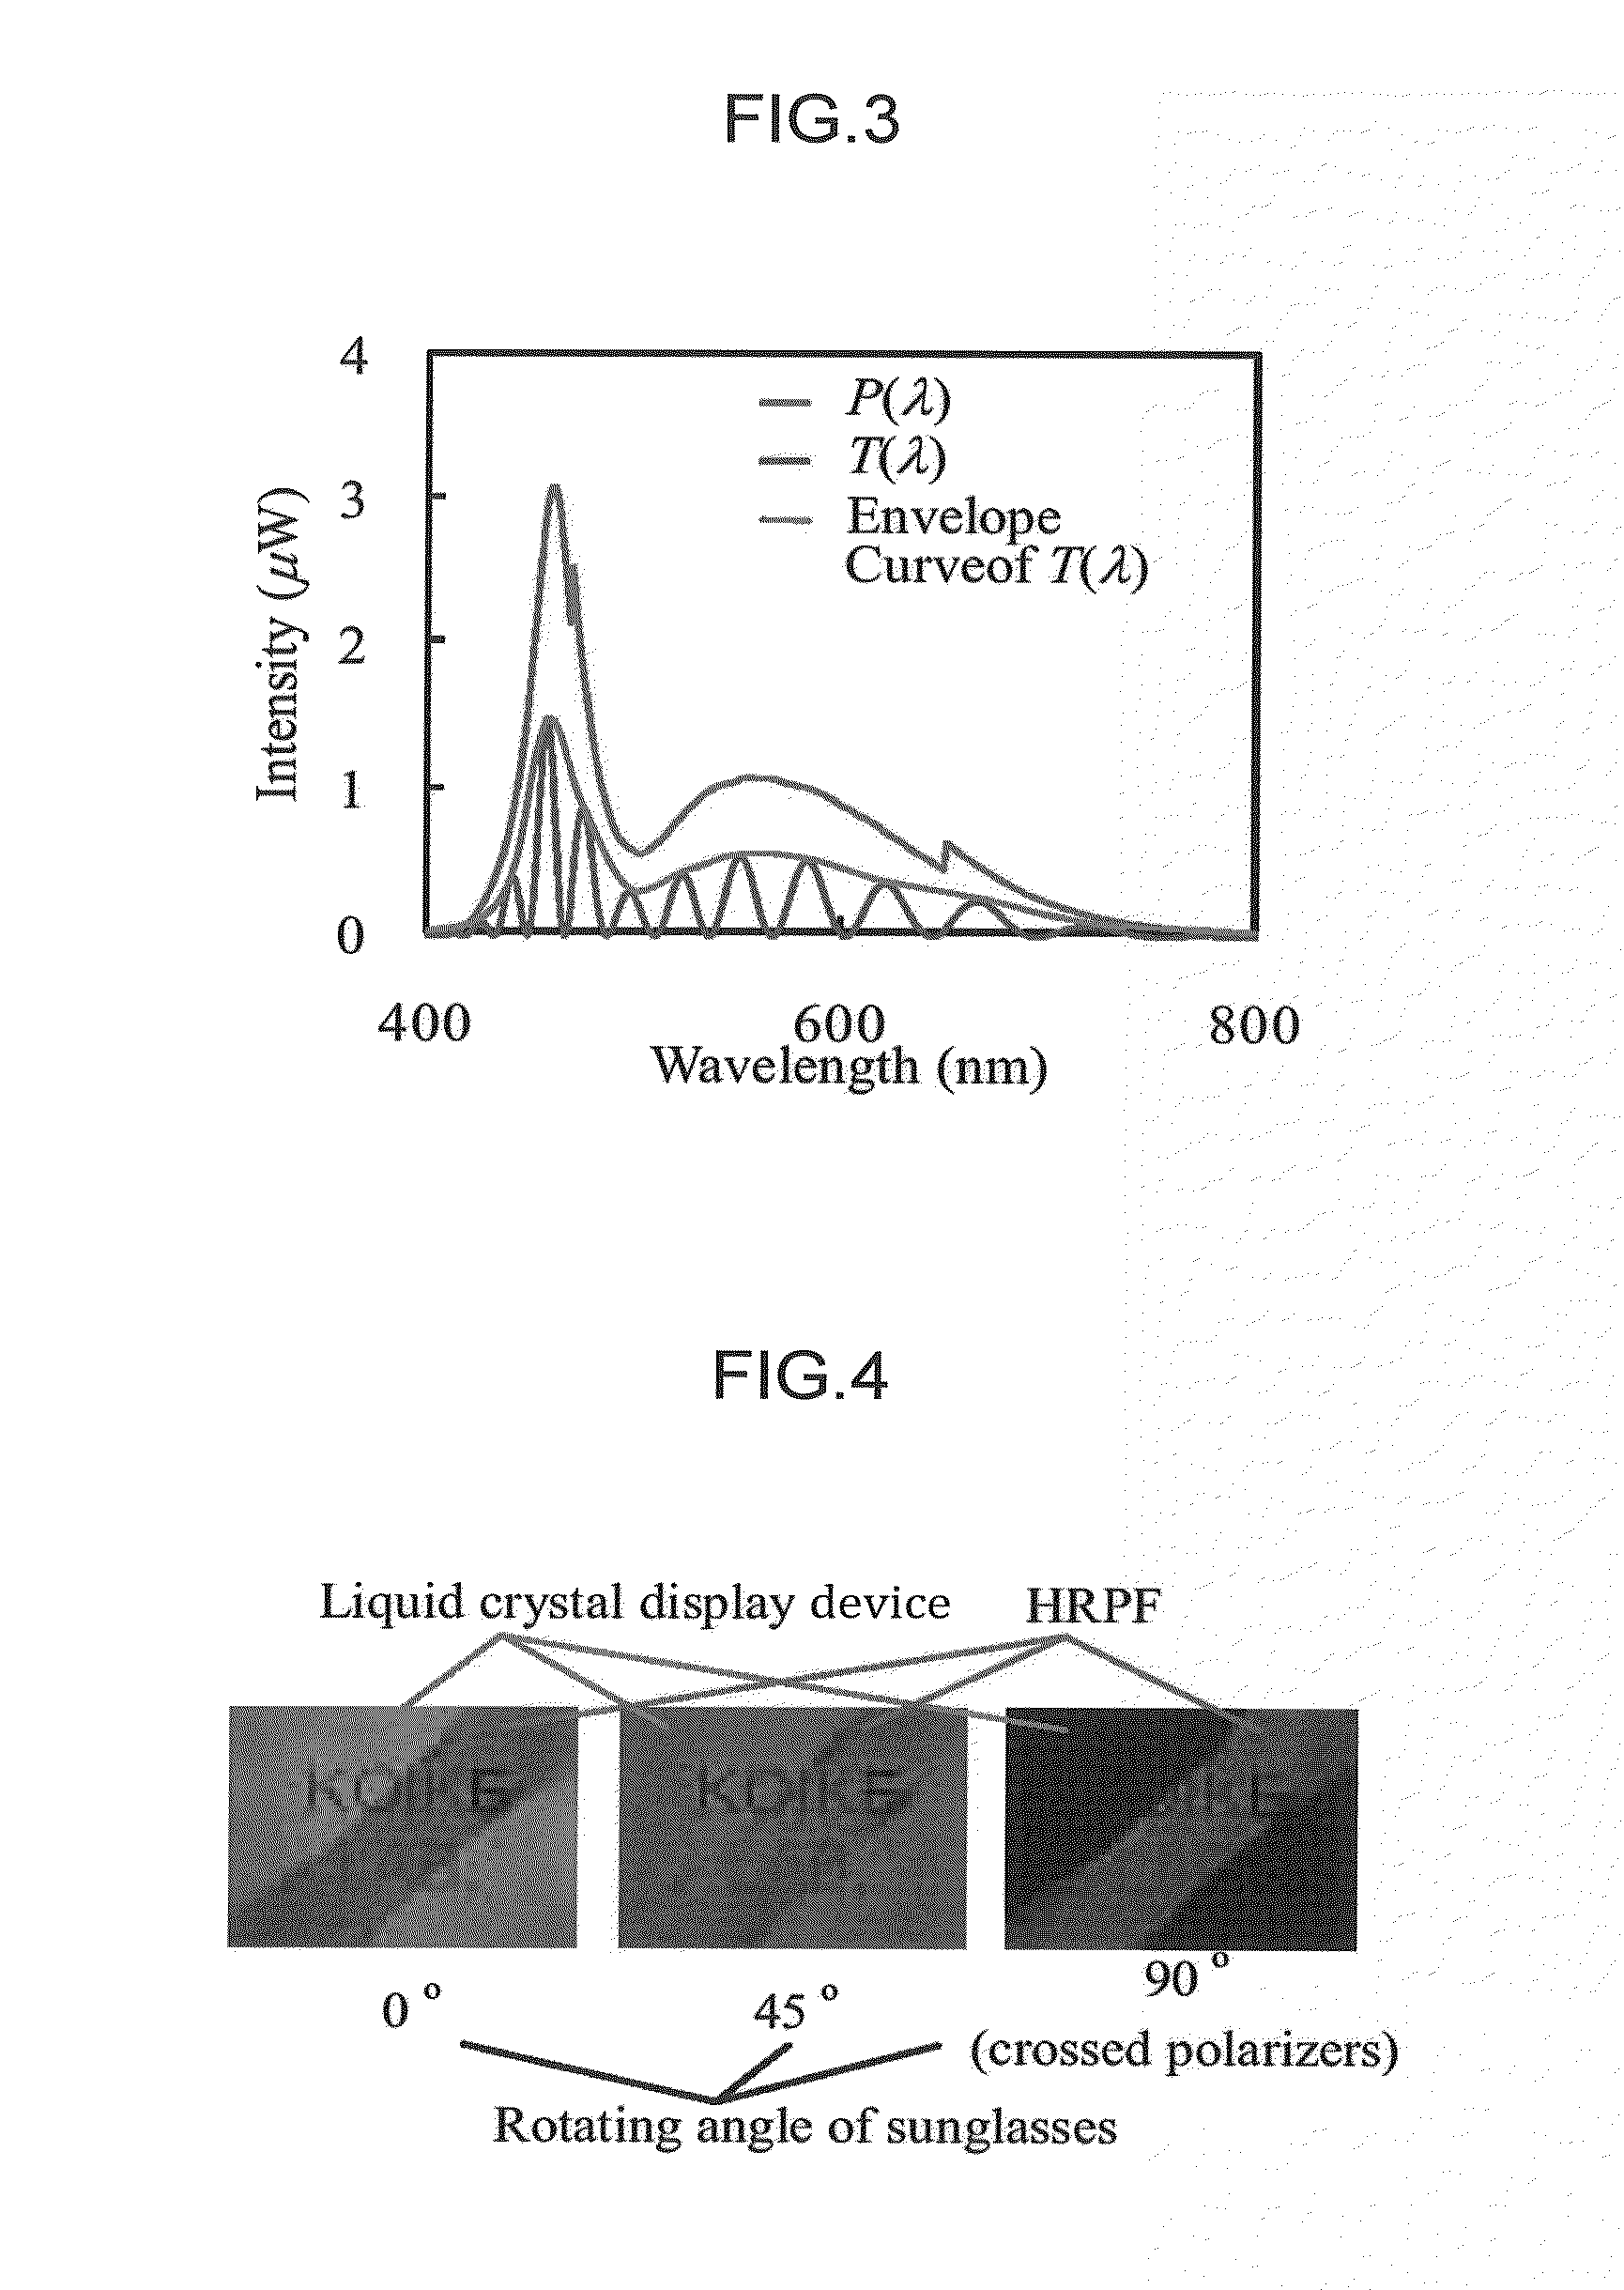 Method for improving visibility of liquid crystal display device, and liquid crystal display device using same